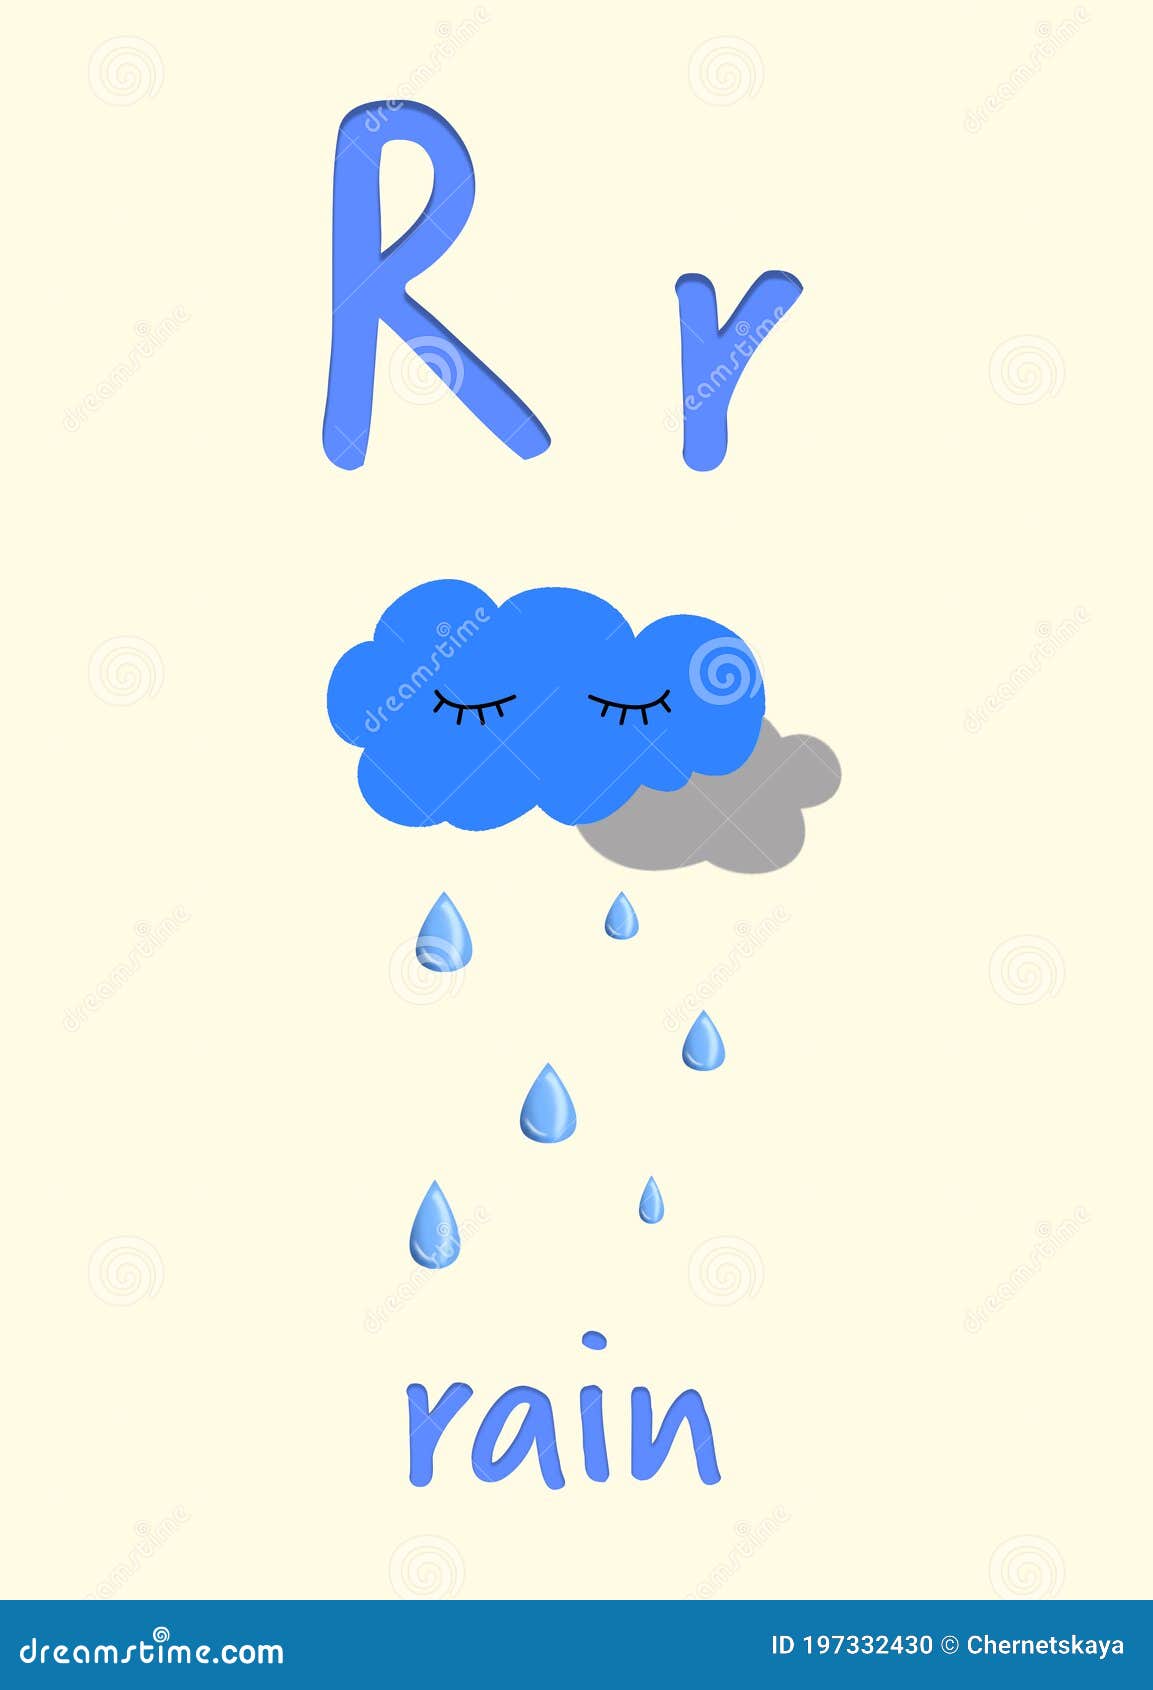 learning-english-alphabet-card-with-letter-r-and-rain-illustration-stock-illustration